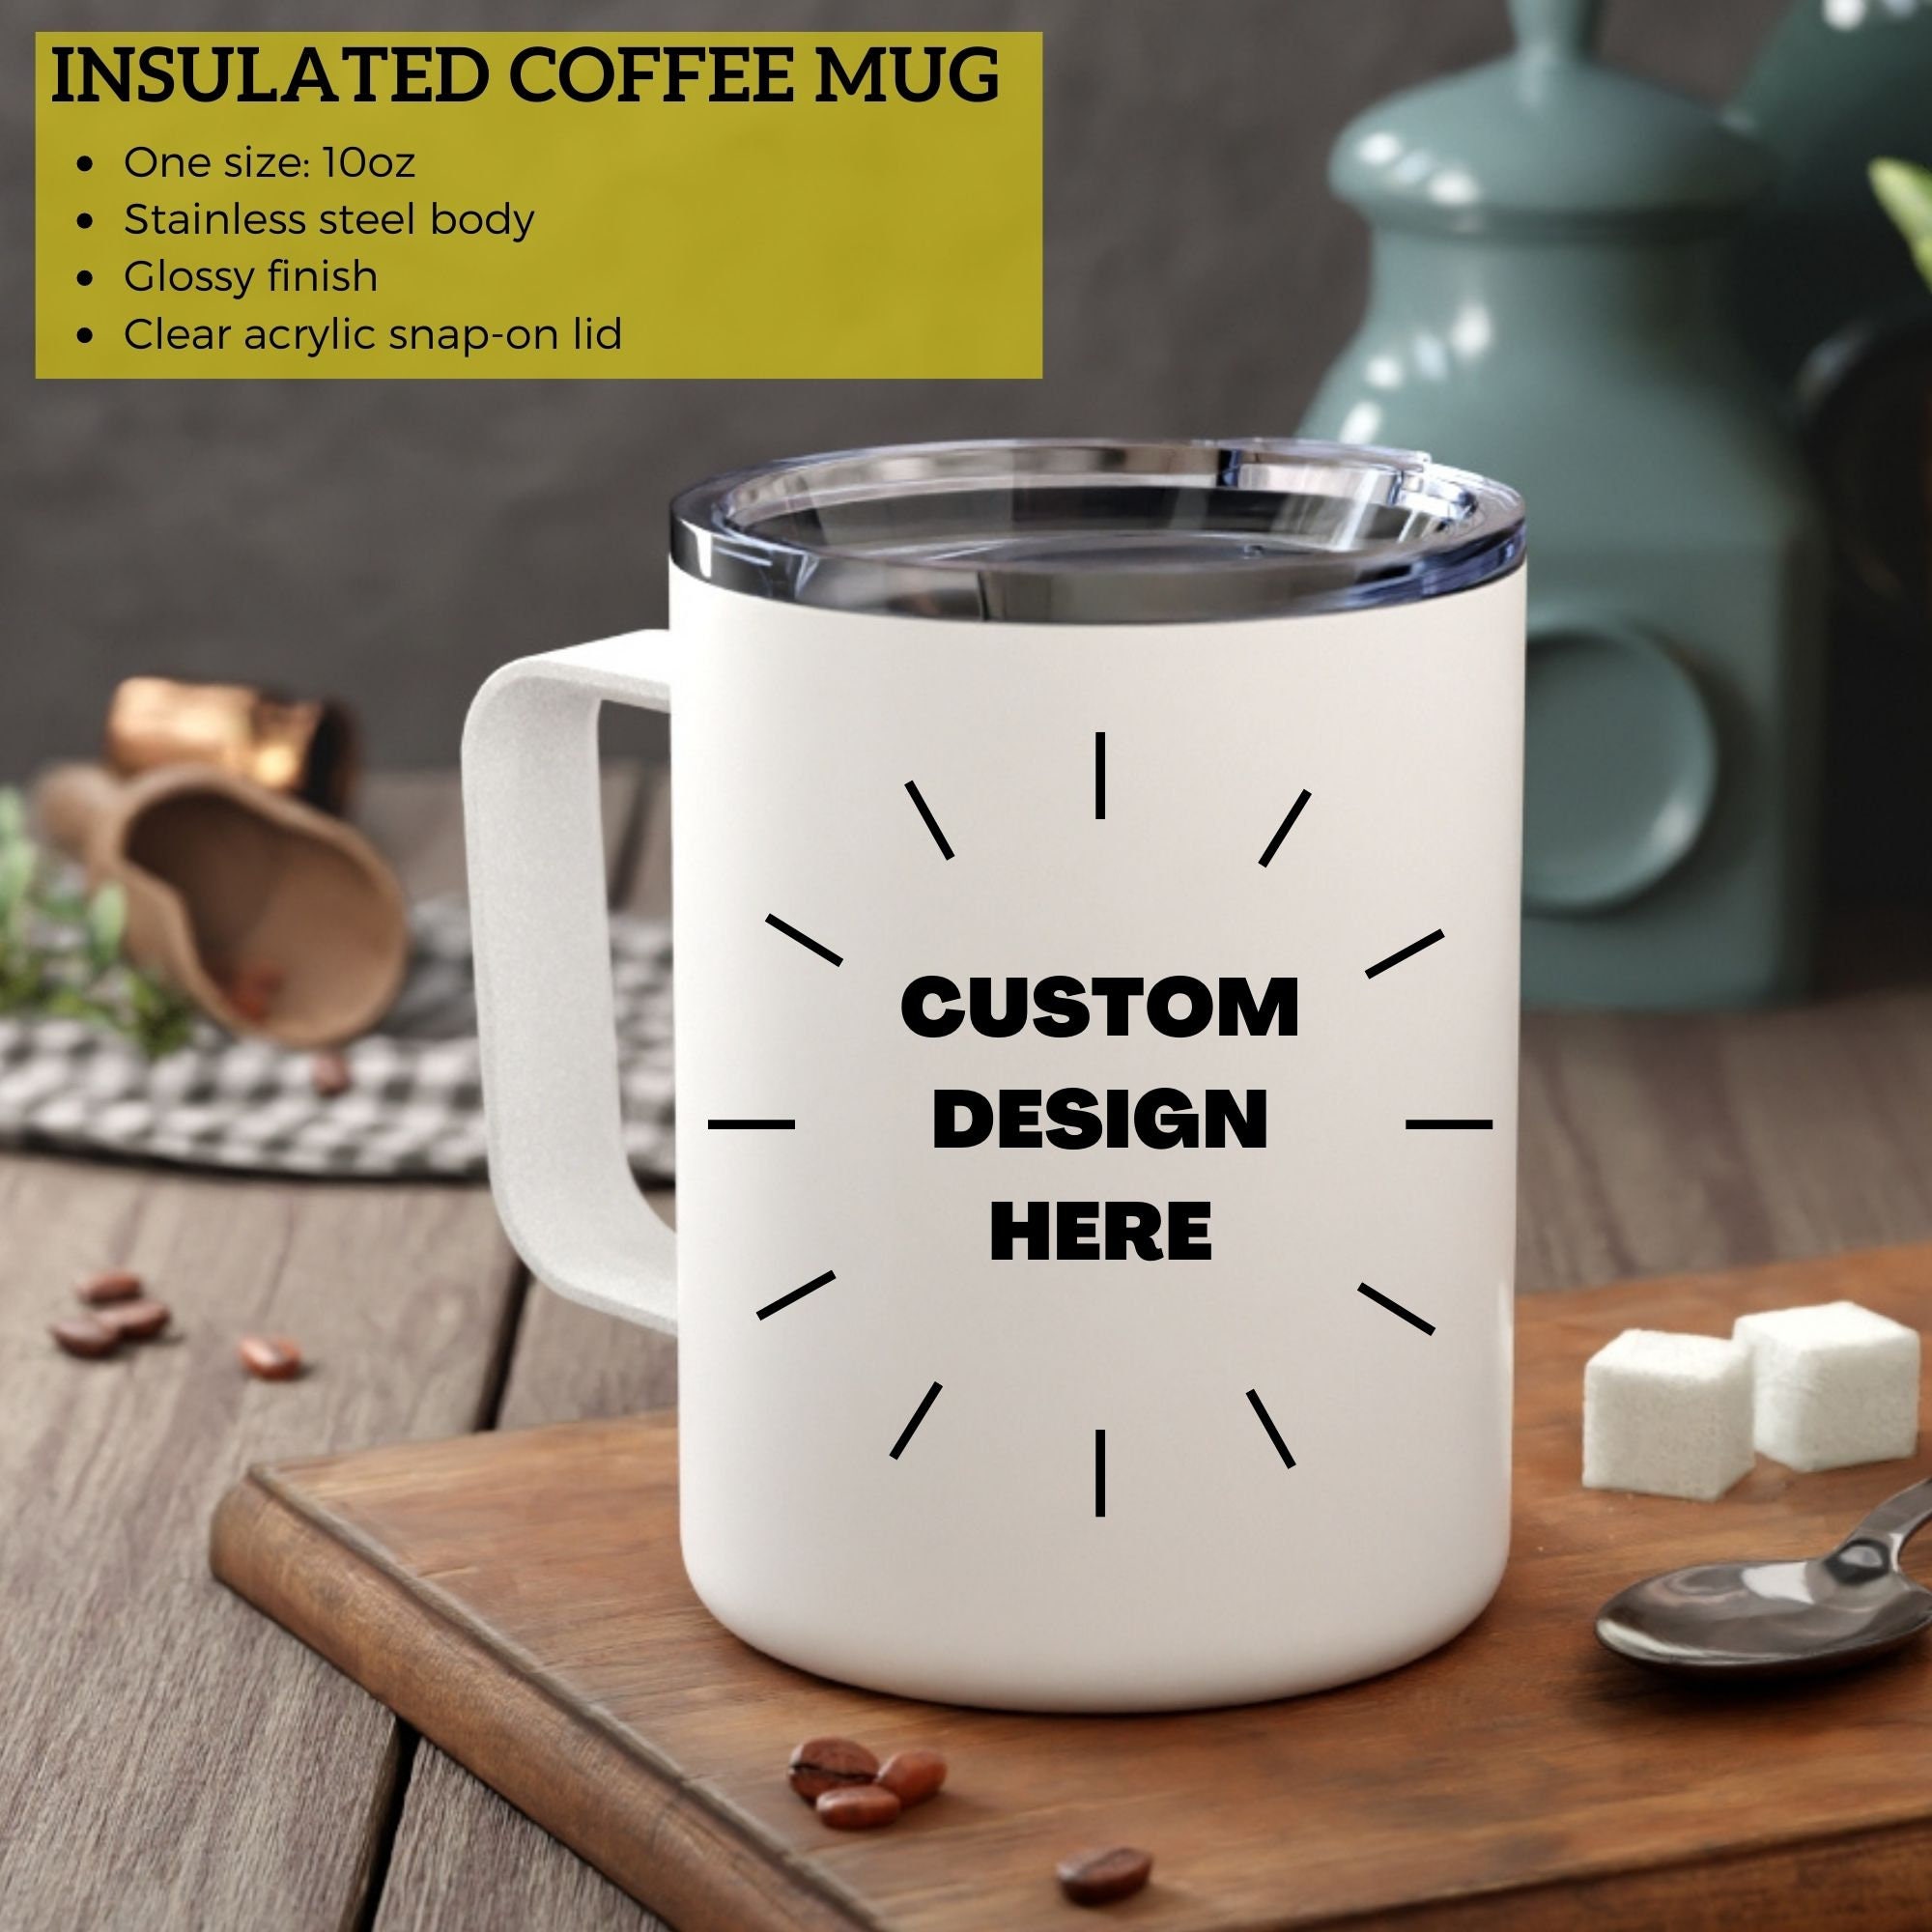 Unique Mugs Cups Gift Presents Let Me Drop Everything And Work On Your Problem Funny Novelty Present Best Gift Ideas for Mom Dad Wife Husband Coworker Boss Friend 14 oz White Bistro Coffee Mug 